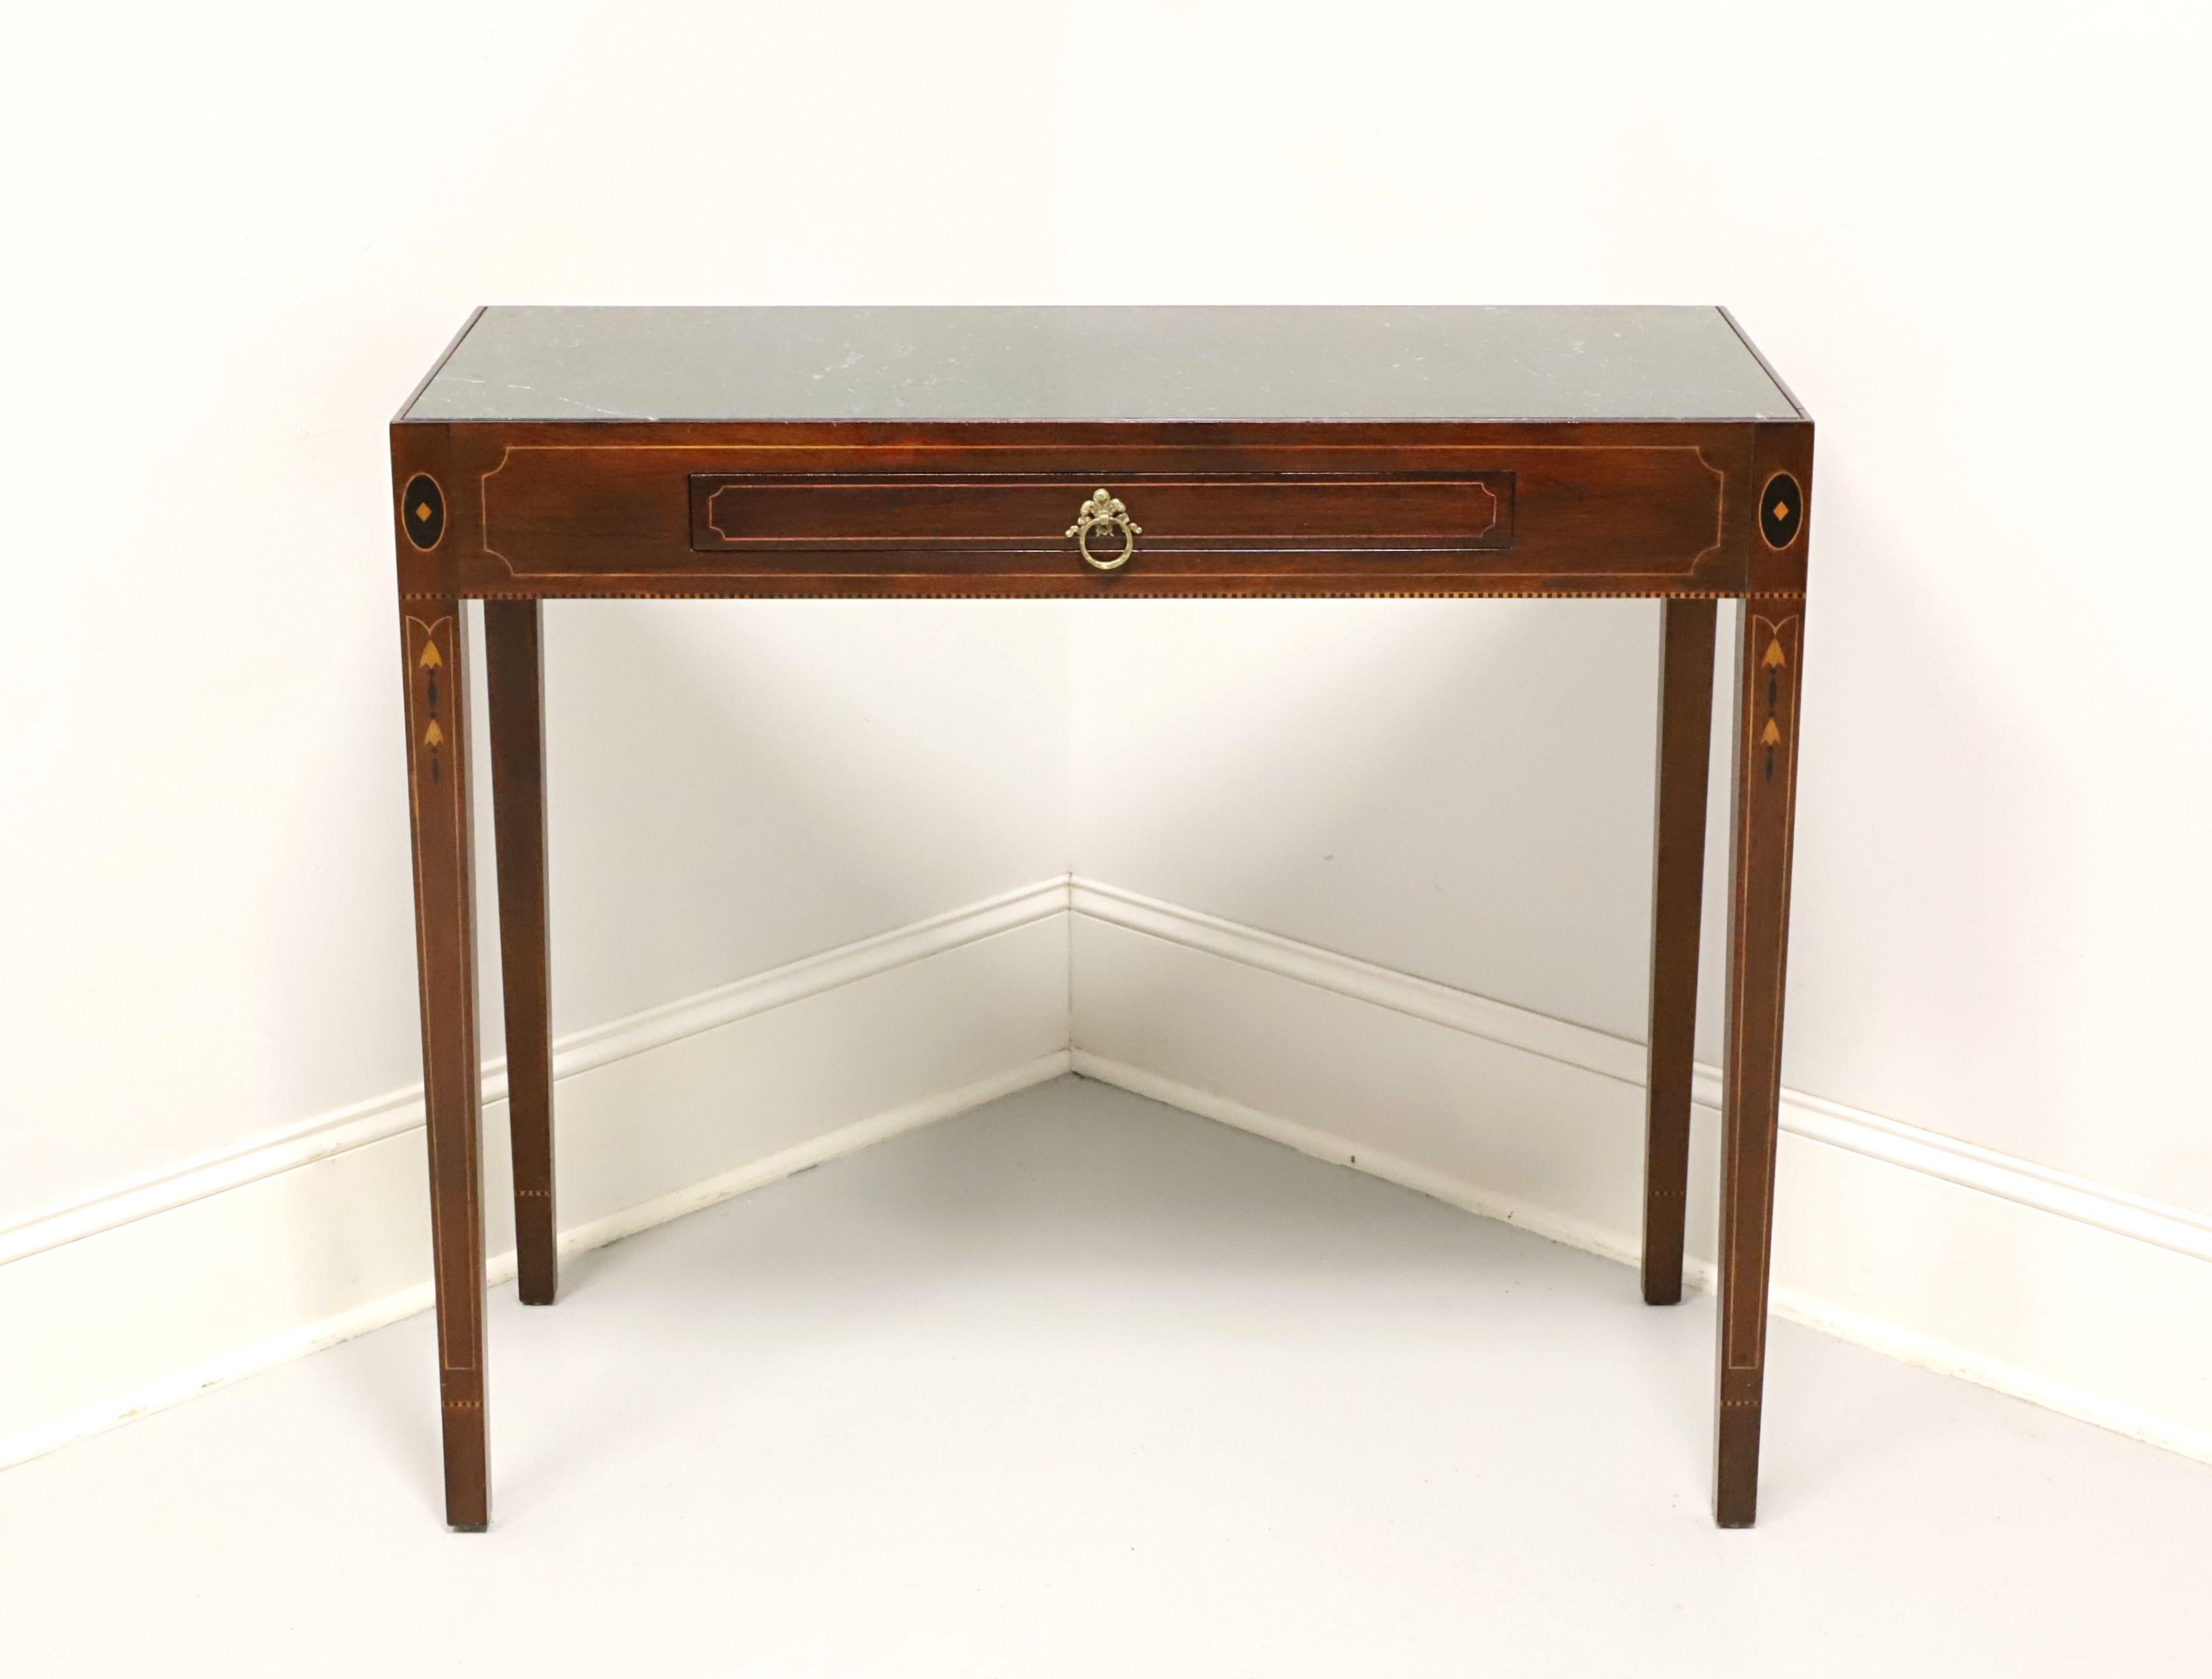 A Federal style console table by Henkel Harris, of Winchester, Virginia, USA. An authorized reproduction by the Museums of Historic Salem of a piece in their possession. Mahogany with inlaid marquetry, inset green marble top, brass hardware and